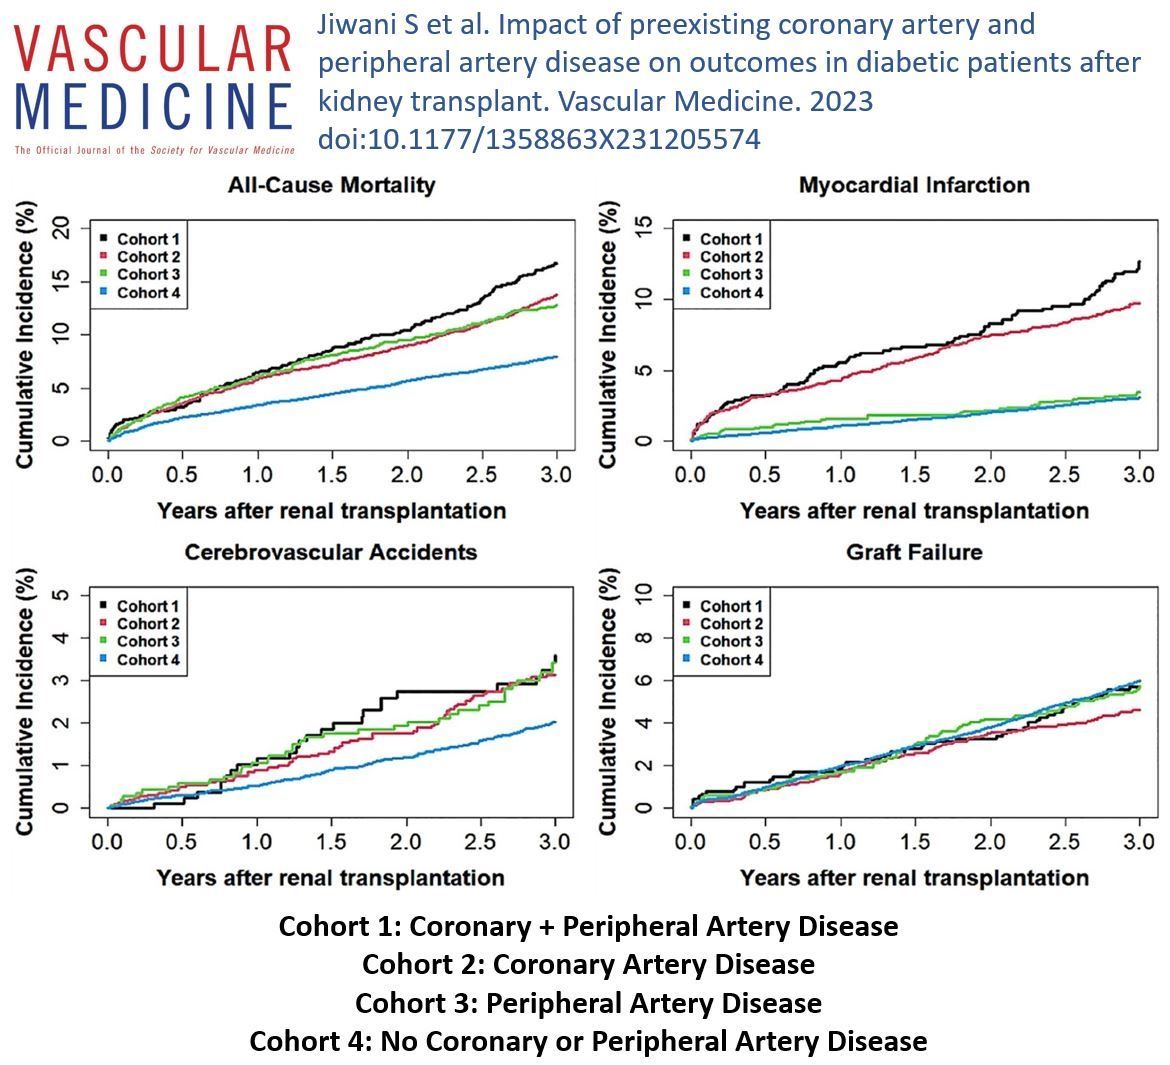 Online First! How does preexisting atherosclerotic disease impact post-renal transplant outcomes of patients with diabetes? @SaniaJiwani @GParmar_MD and colleagues share analysis of the United States Renal Data System. buff.ly/40xKAaj #Atherosclerosis #PolyvascularDisease